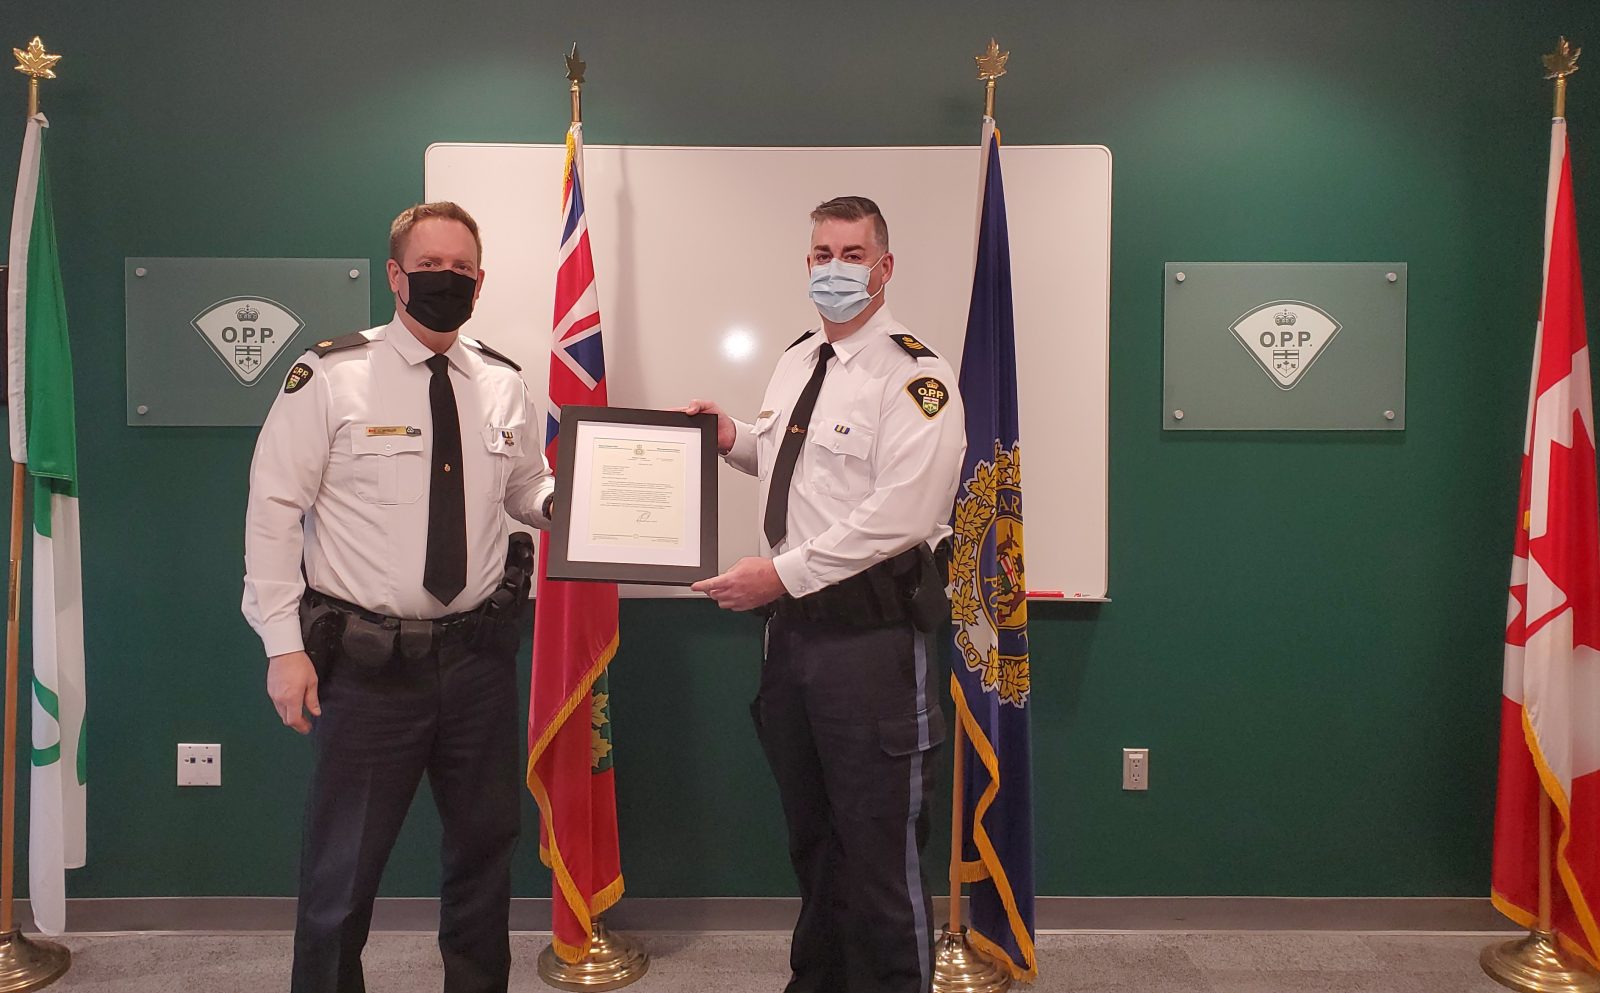 Russell detective receives OPP commendation